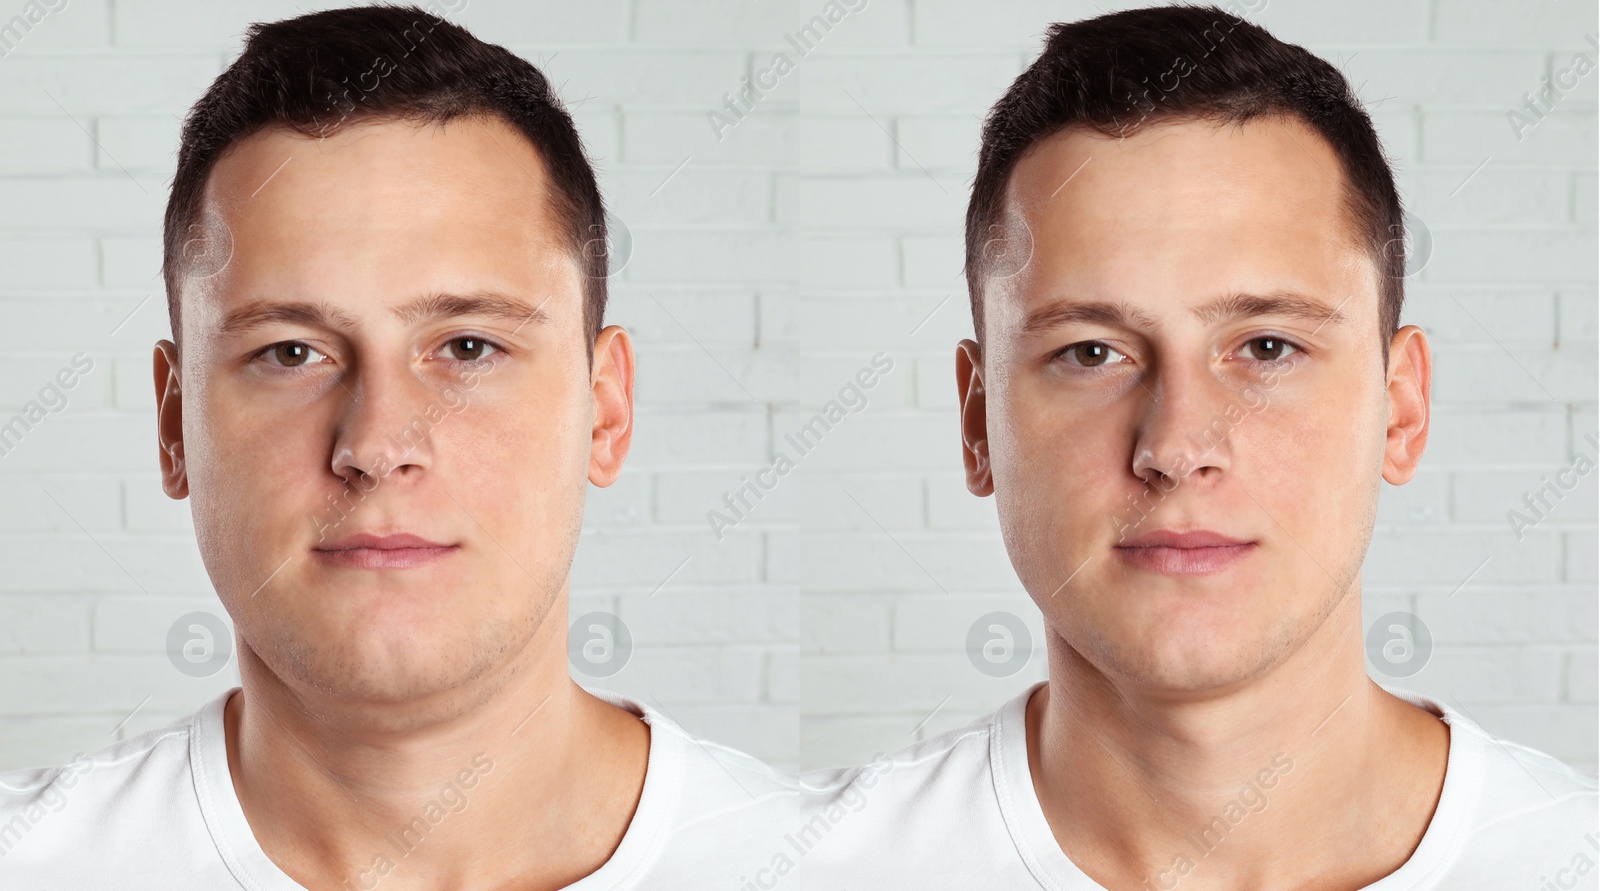 Image of Double chin problem. Collage with photos of man before and after plastic surgery procedure near white brick wall, banner design